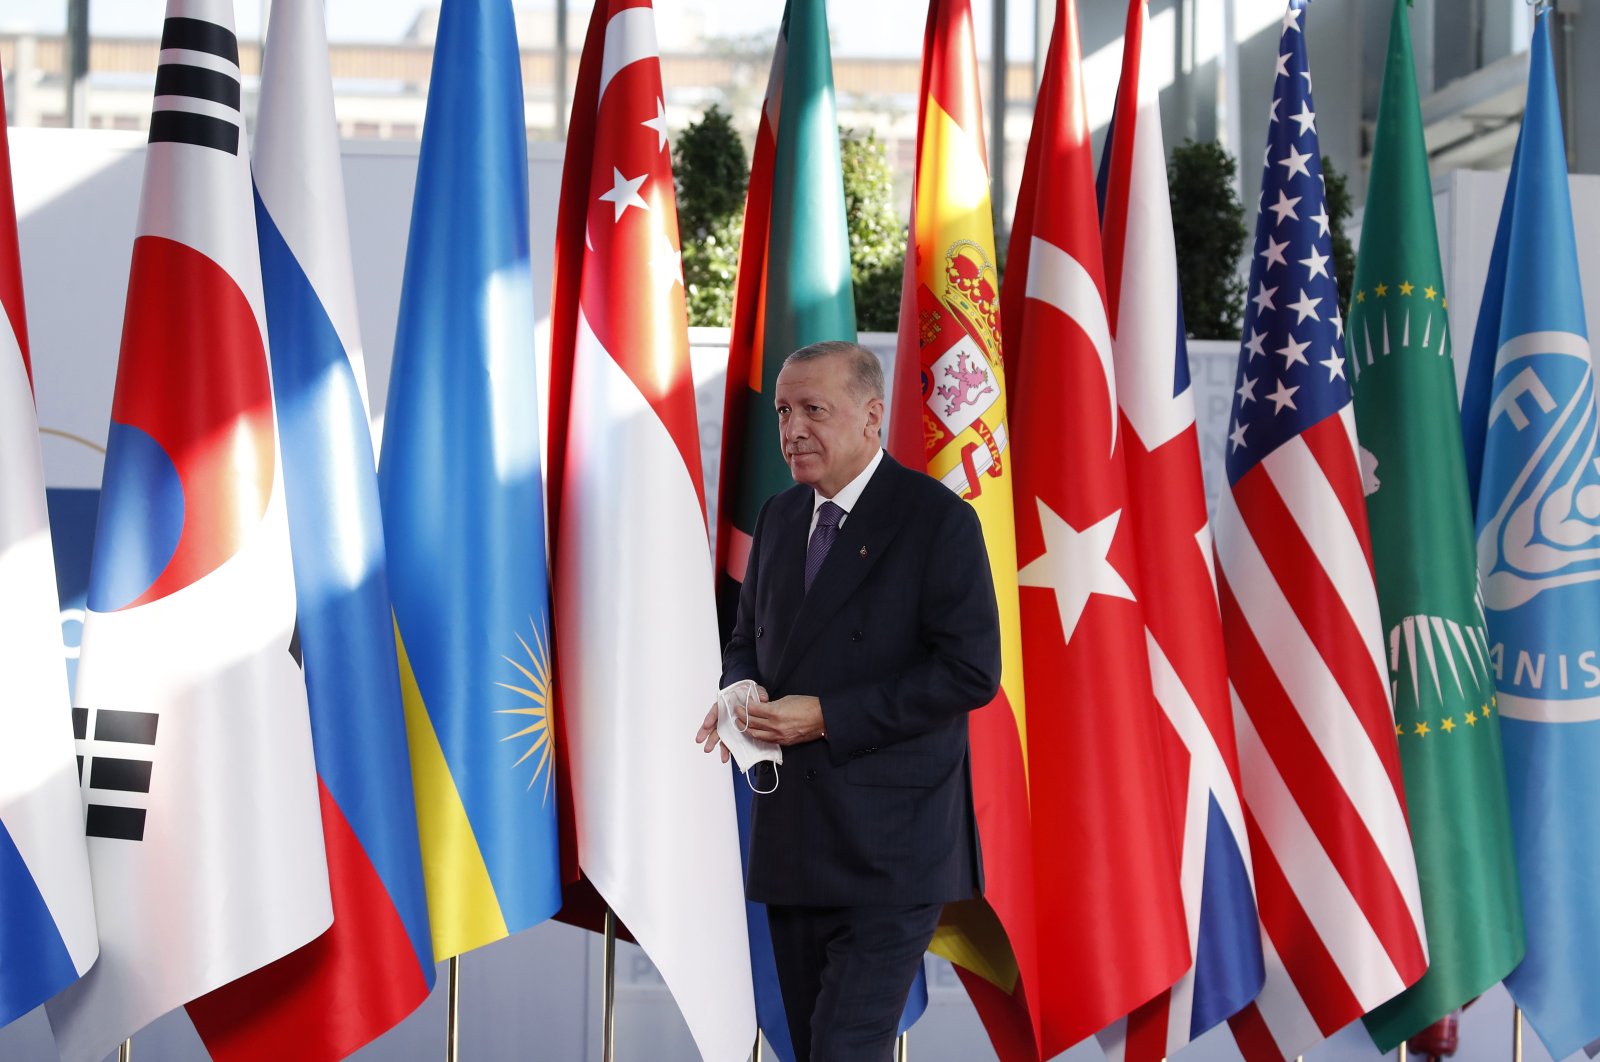 President Recep Tayyip Erdoğan attends a G-20 gathering in Rome, Italy, Oct. 30, 2021. (Photo by Getty Images)